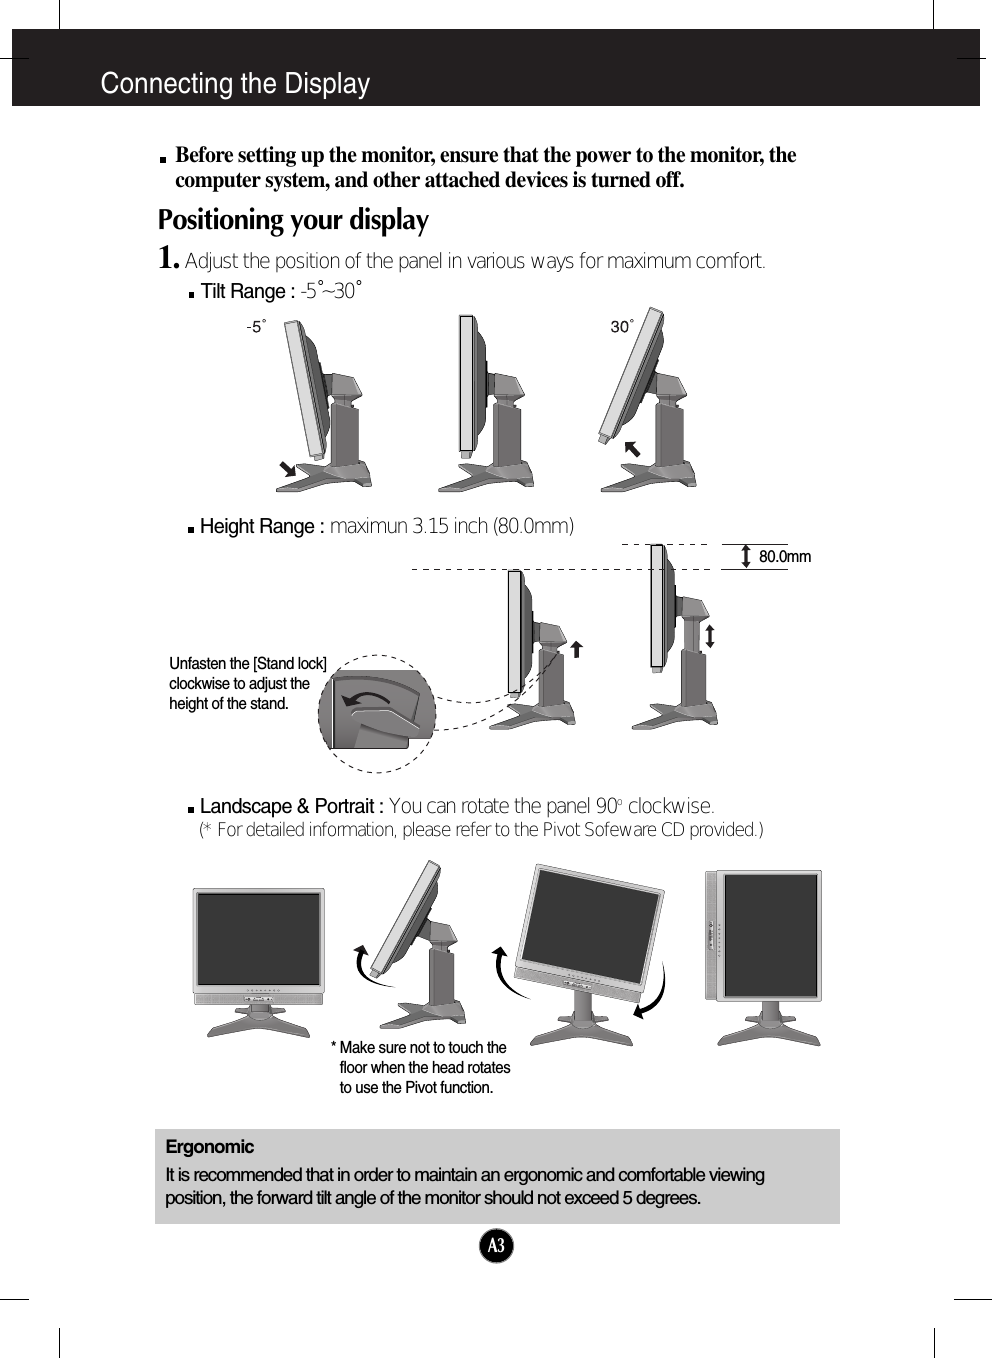 Connecting the DisplayA3Before setting up the monitor, ensure that the power to the monitor, thecomputer system, and other attached devices is turned off. Positioning your display1. Adjust the position of the panel in various ways for maximum comfort.Tilt Range : -5˚~30˚ErgonomicIt is recommended that in order to maintain an ergonomic and comfortable viewingposition, the forward tilt angle of the monitor should not exceed 5 degrees.Height Range : maximun 3.15 inch (80.0mm)Landscape &amp; Portrait : You can rotate the panel 90o  clockwise. (* For detailed information, please refer to the Pivot Sofeware CD provided.)VOLUMEVOLUMEVOLUME* Make sure not to touch thefloor when the head rotatesto use the Pivot function.80.0mmUnfasten the [Stand lock]clockwise to adjust theheight of the stand.